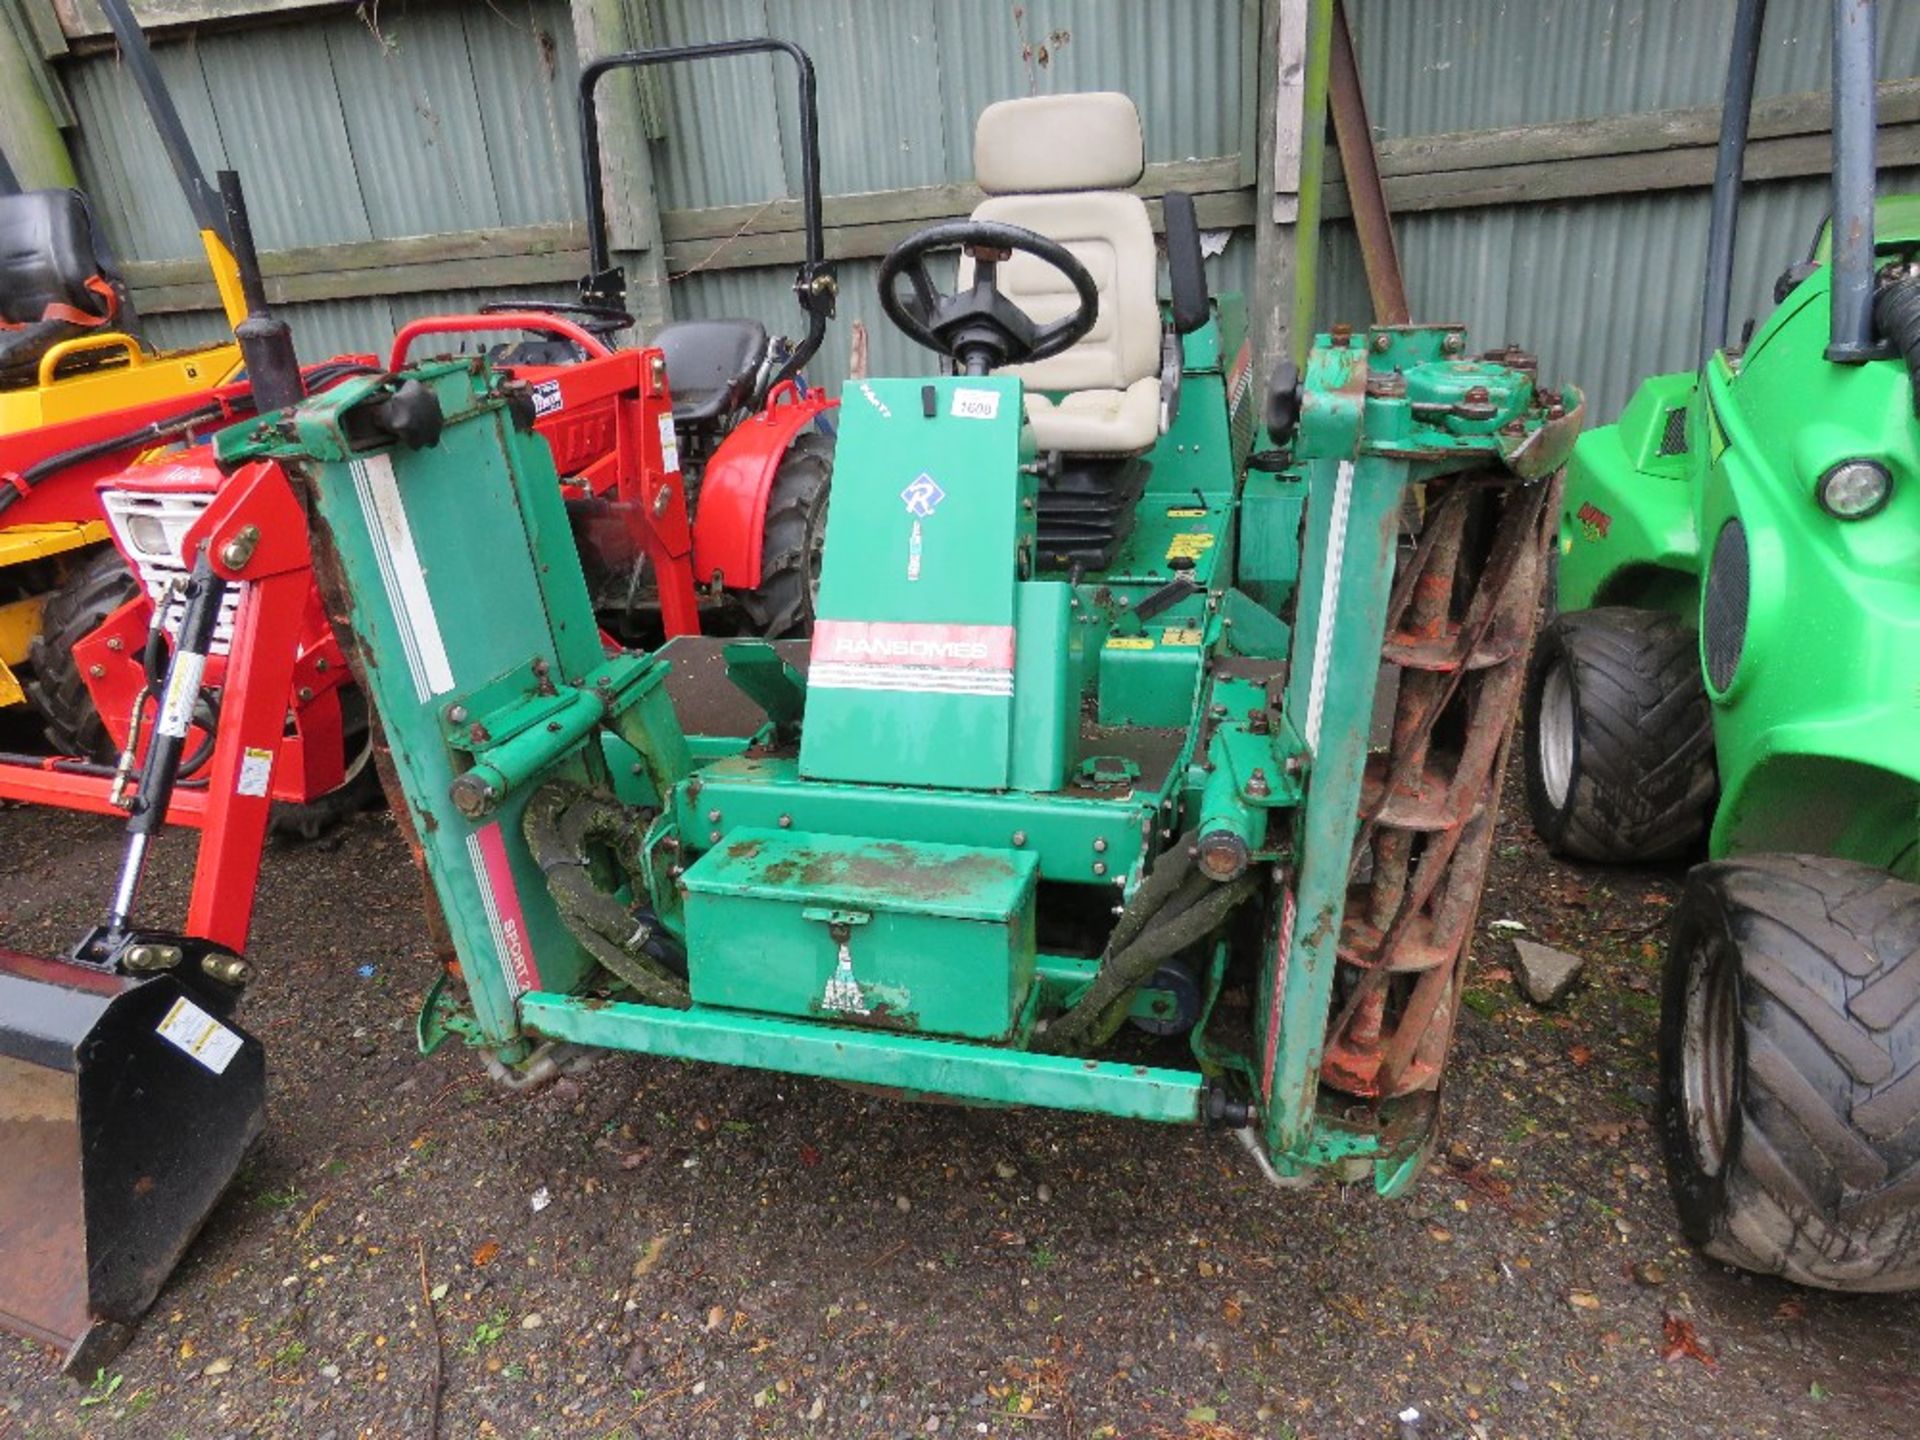 RANSOMES HIGHWAY 2130 33HP TRIPLE RIDE ON MOWER WITH KUBOTA ENGINE. - Image 2 of 6